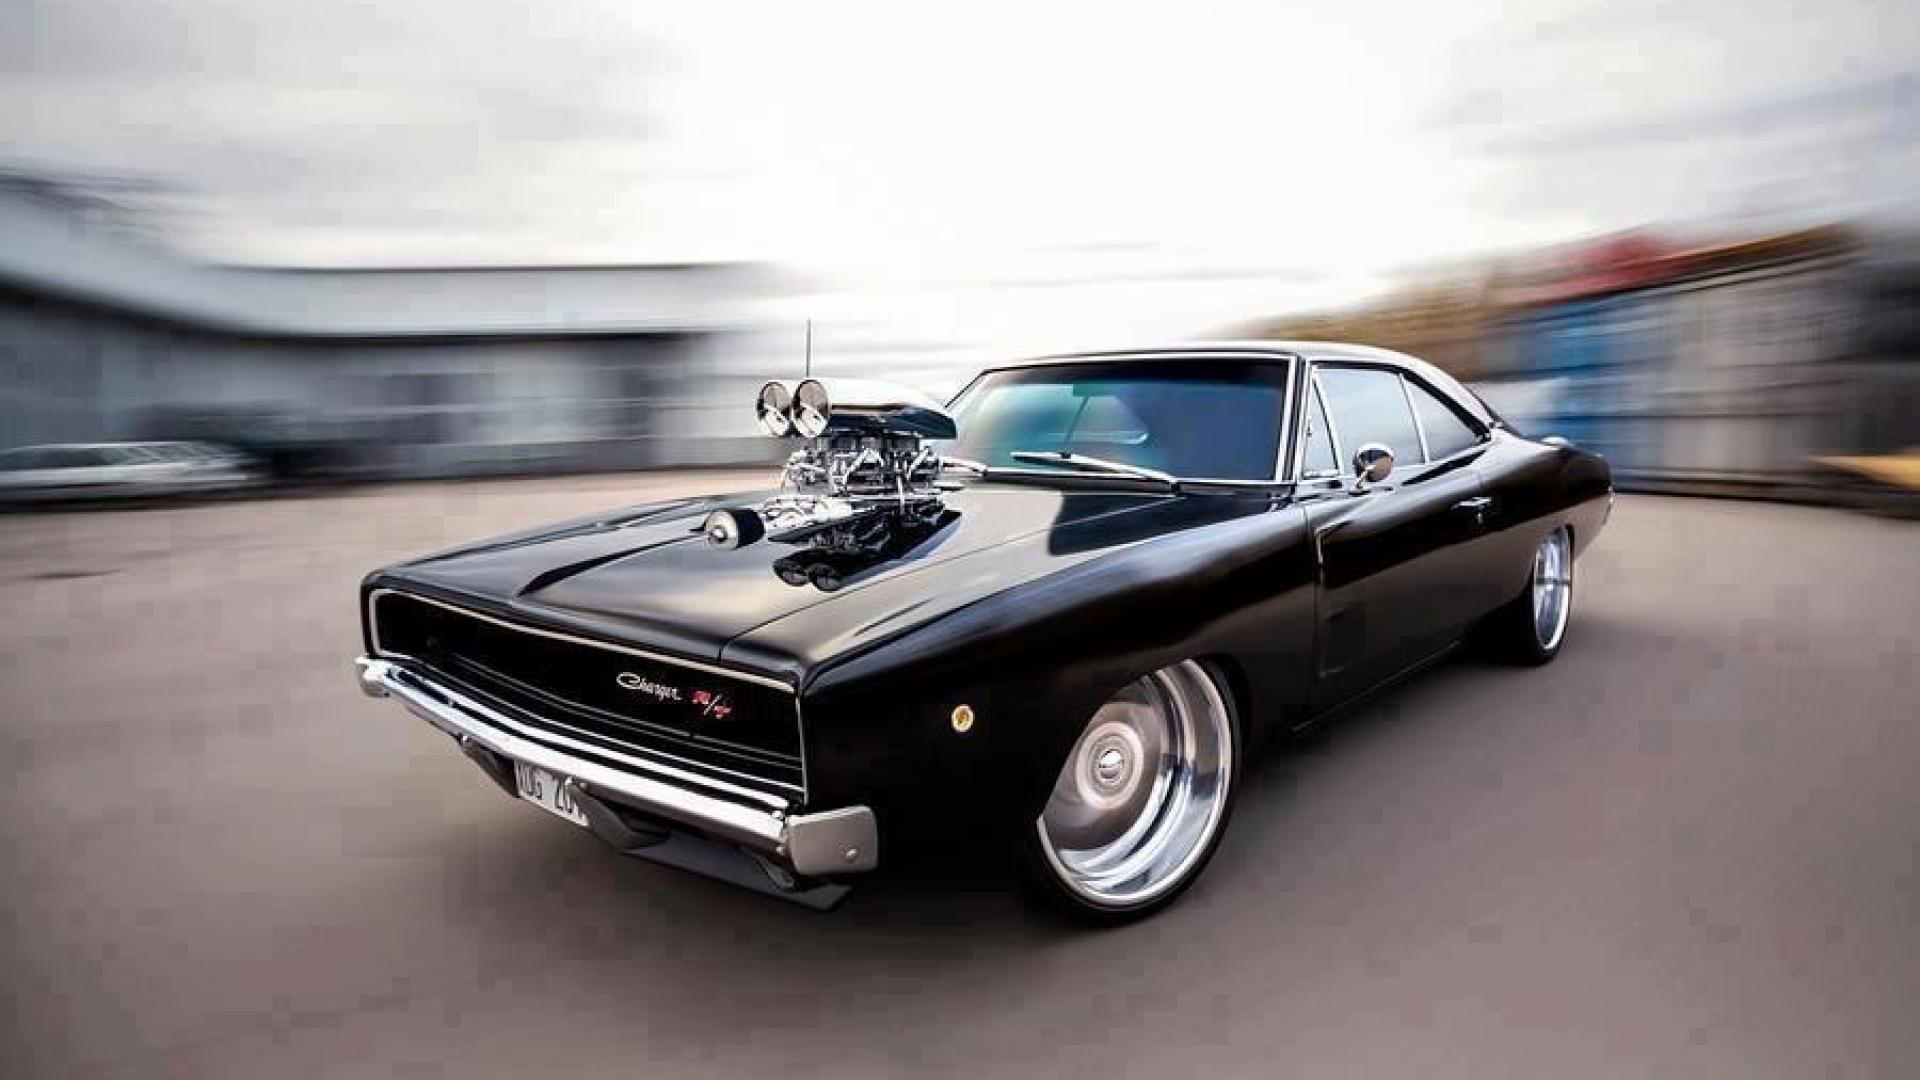 1968 Dodge Charger Wallpaper Hd Download